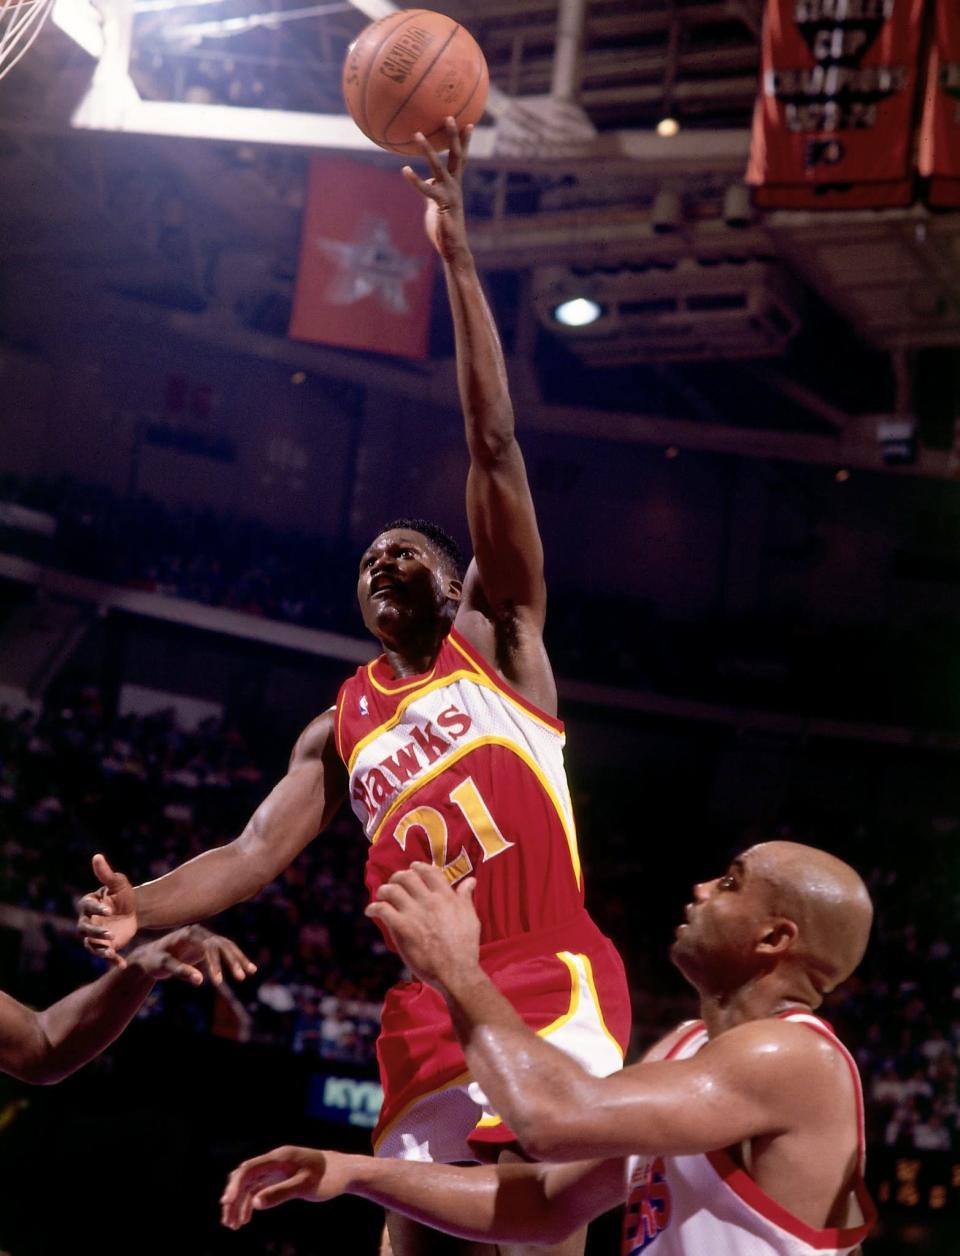 Dominique Wilkins soars over Charles Barkley and the Sixers. (Nathaniel S. Butler/NBAE via Getty Images)